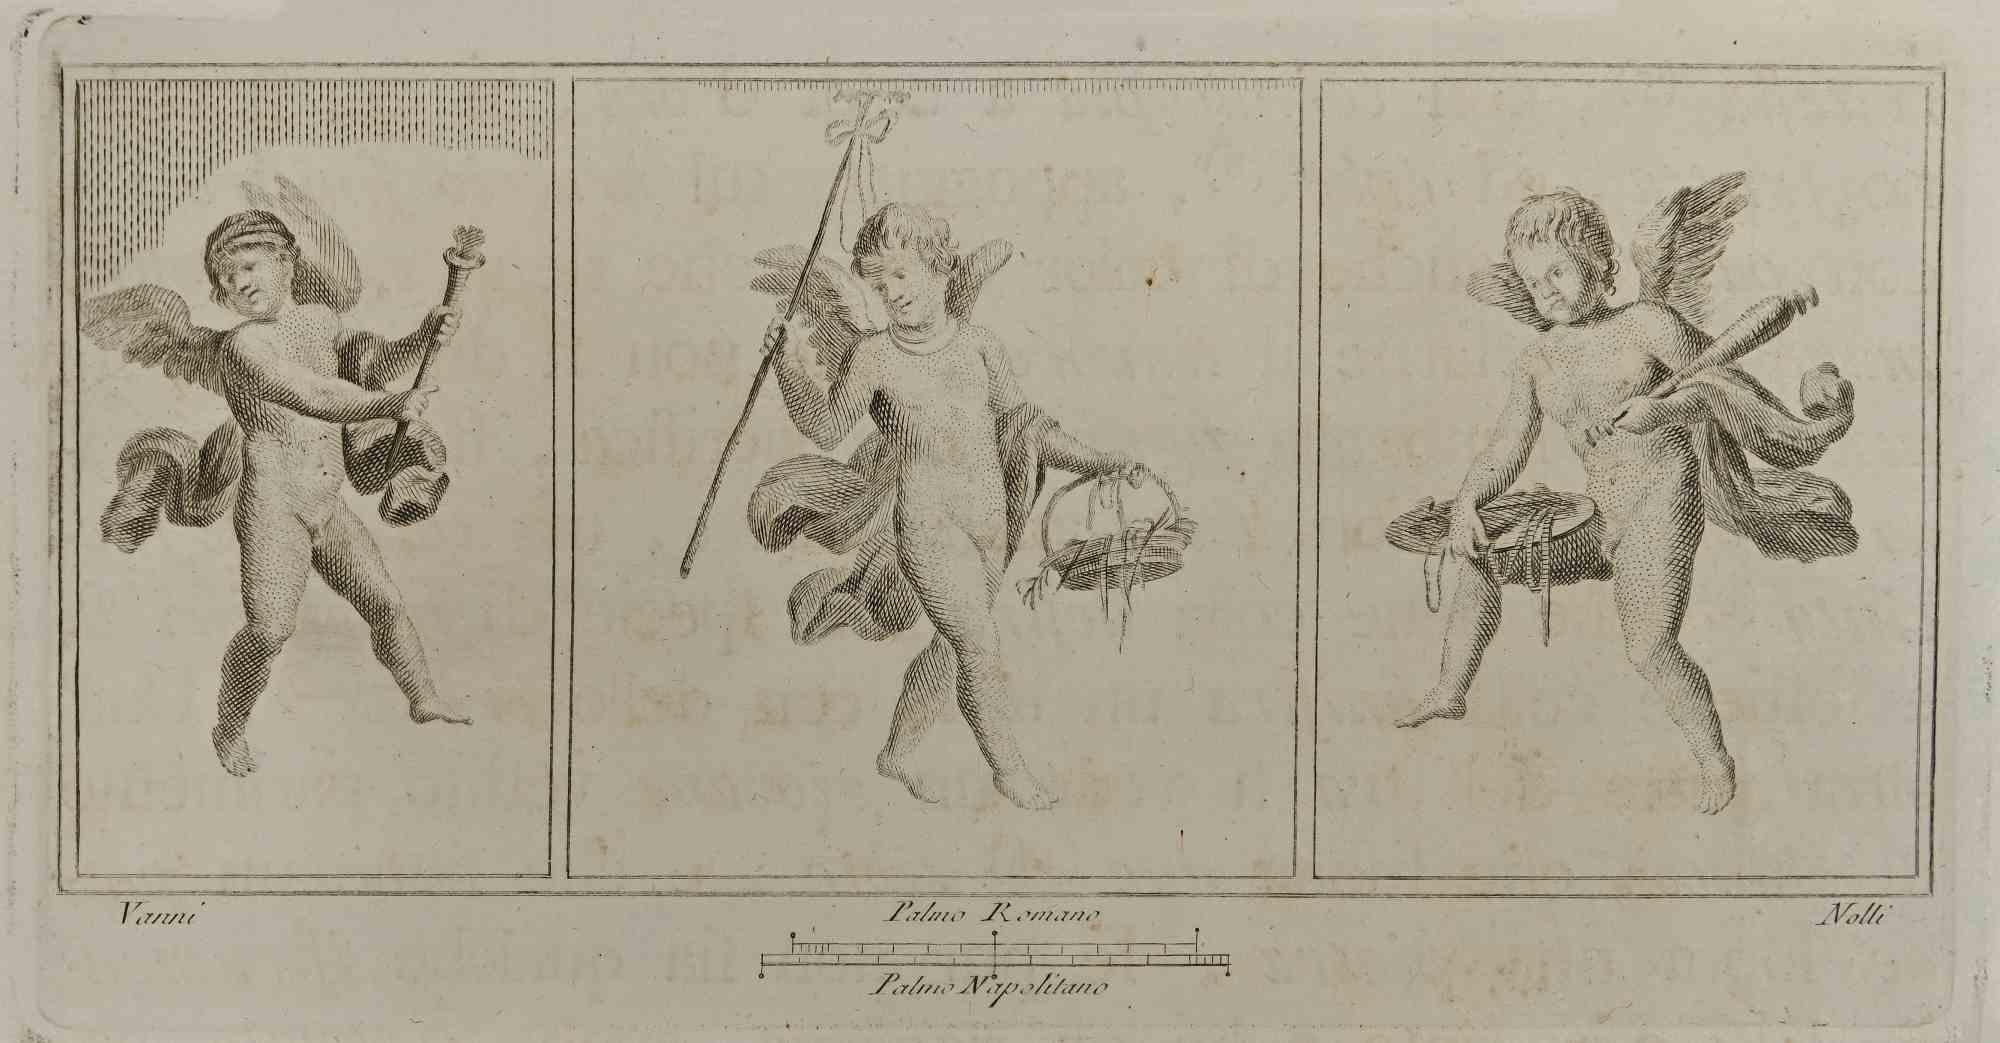 Cupid In Three Frames from "Antiquities of Herculaneum" is an etching on paper realized by Carlo Nolli in the 18th Century.

Signed on the plate.

Good conditions.

The etching belongs to the print suite “Antiquities of Herculaneum Exposed”